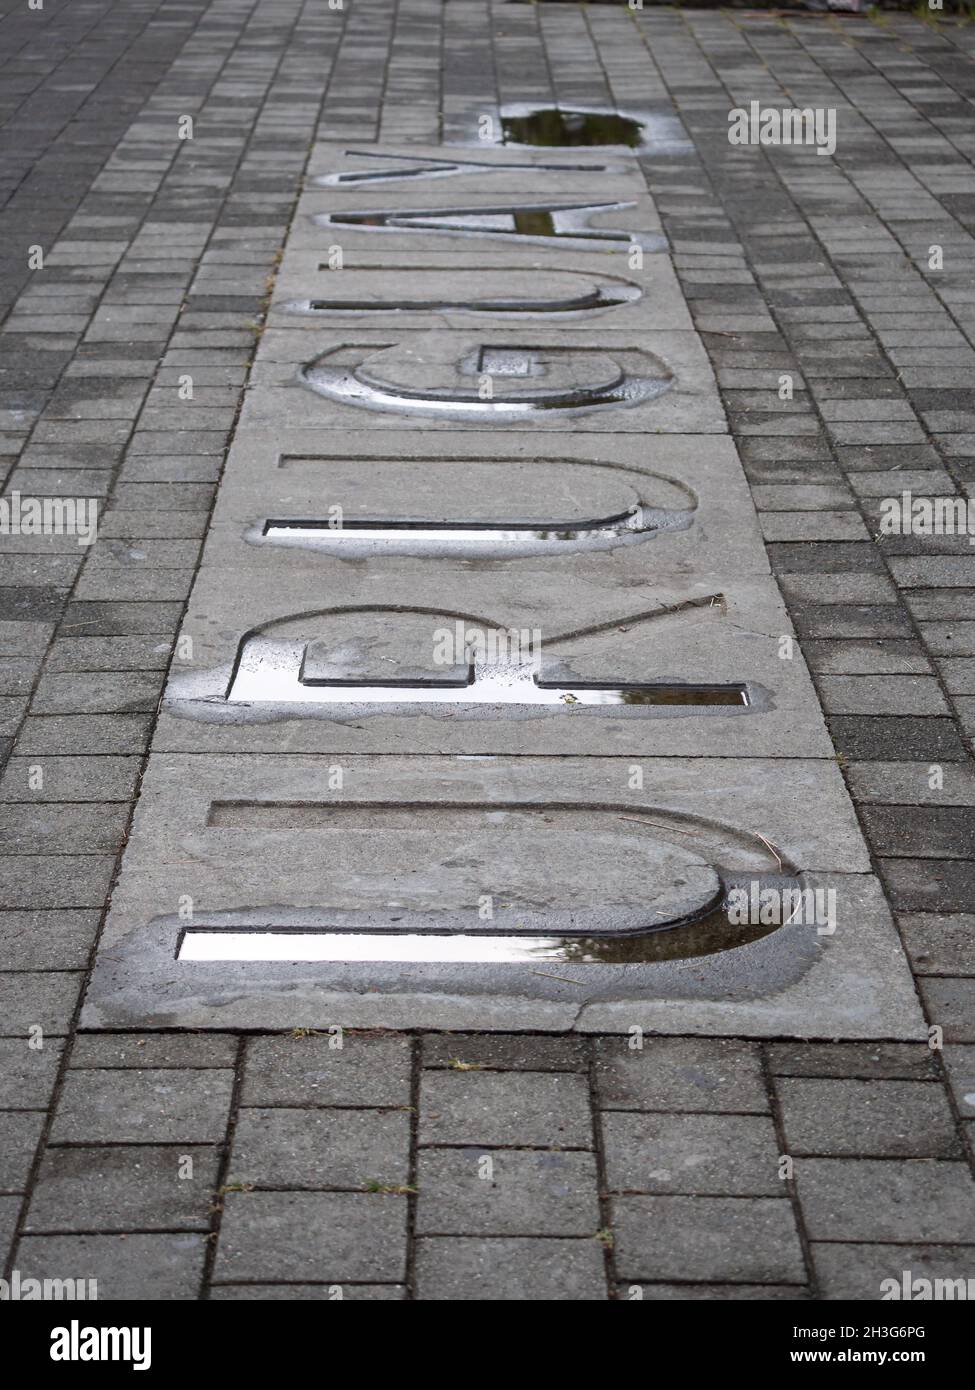 Uruguay, Country Name Written in Large Letters on a Wet Cement Floor in a Public Park Stock Photo